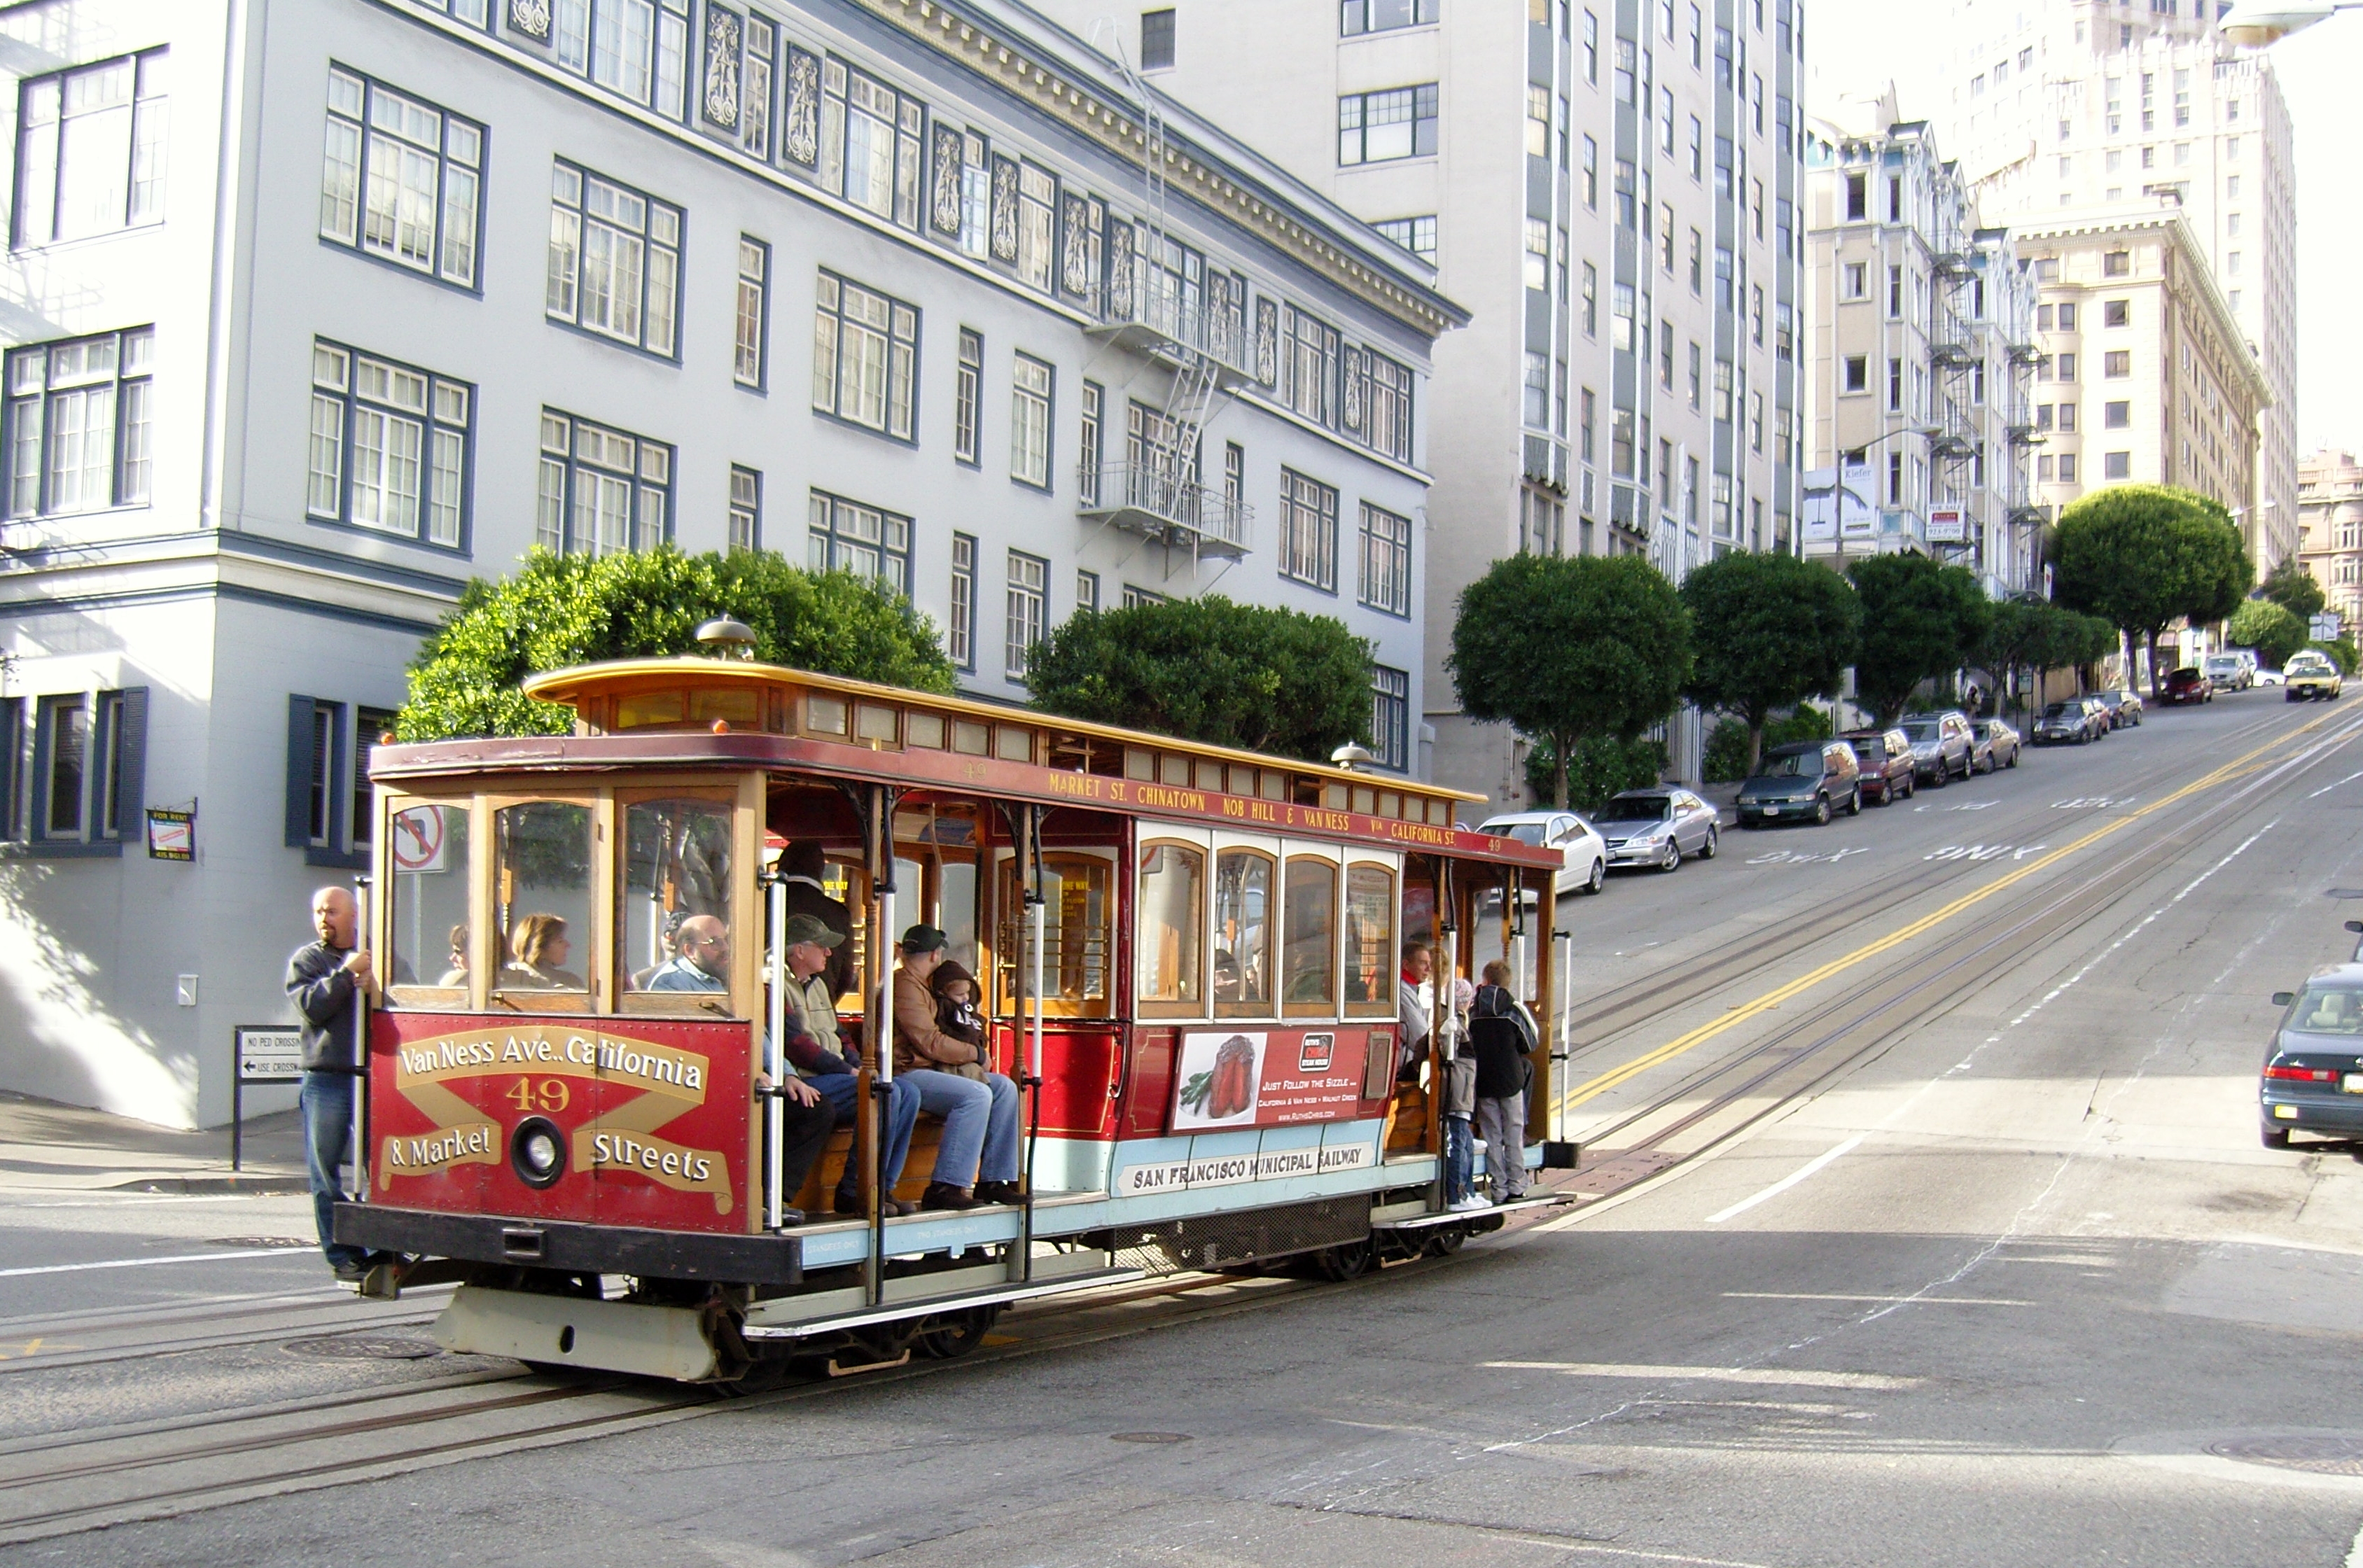 Amazing Cable Car Pictures & Backgrounds